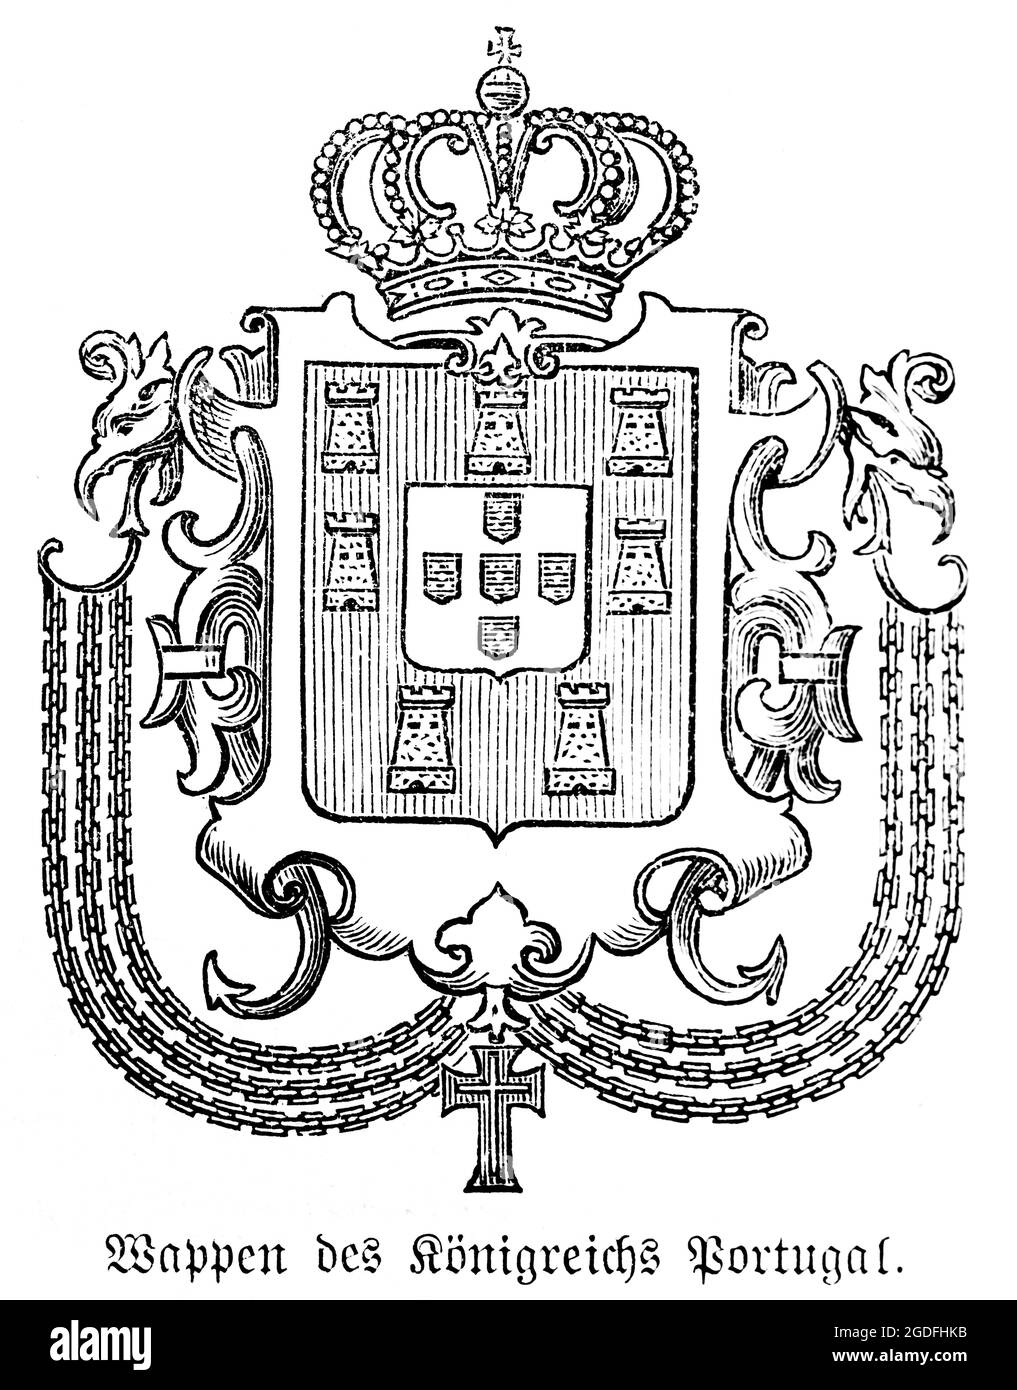 Coat of arms of the Kingdom of Portugal in the 16th century, historic illustration 1881 Stock Photo